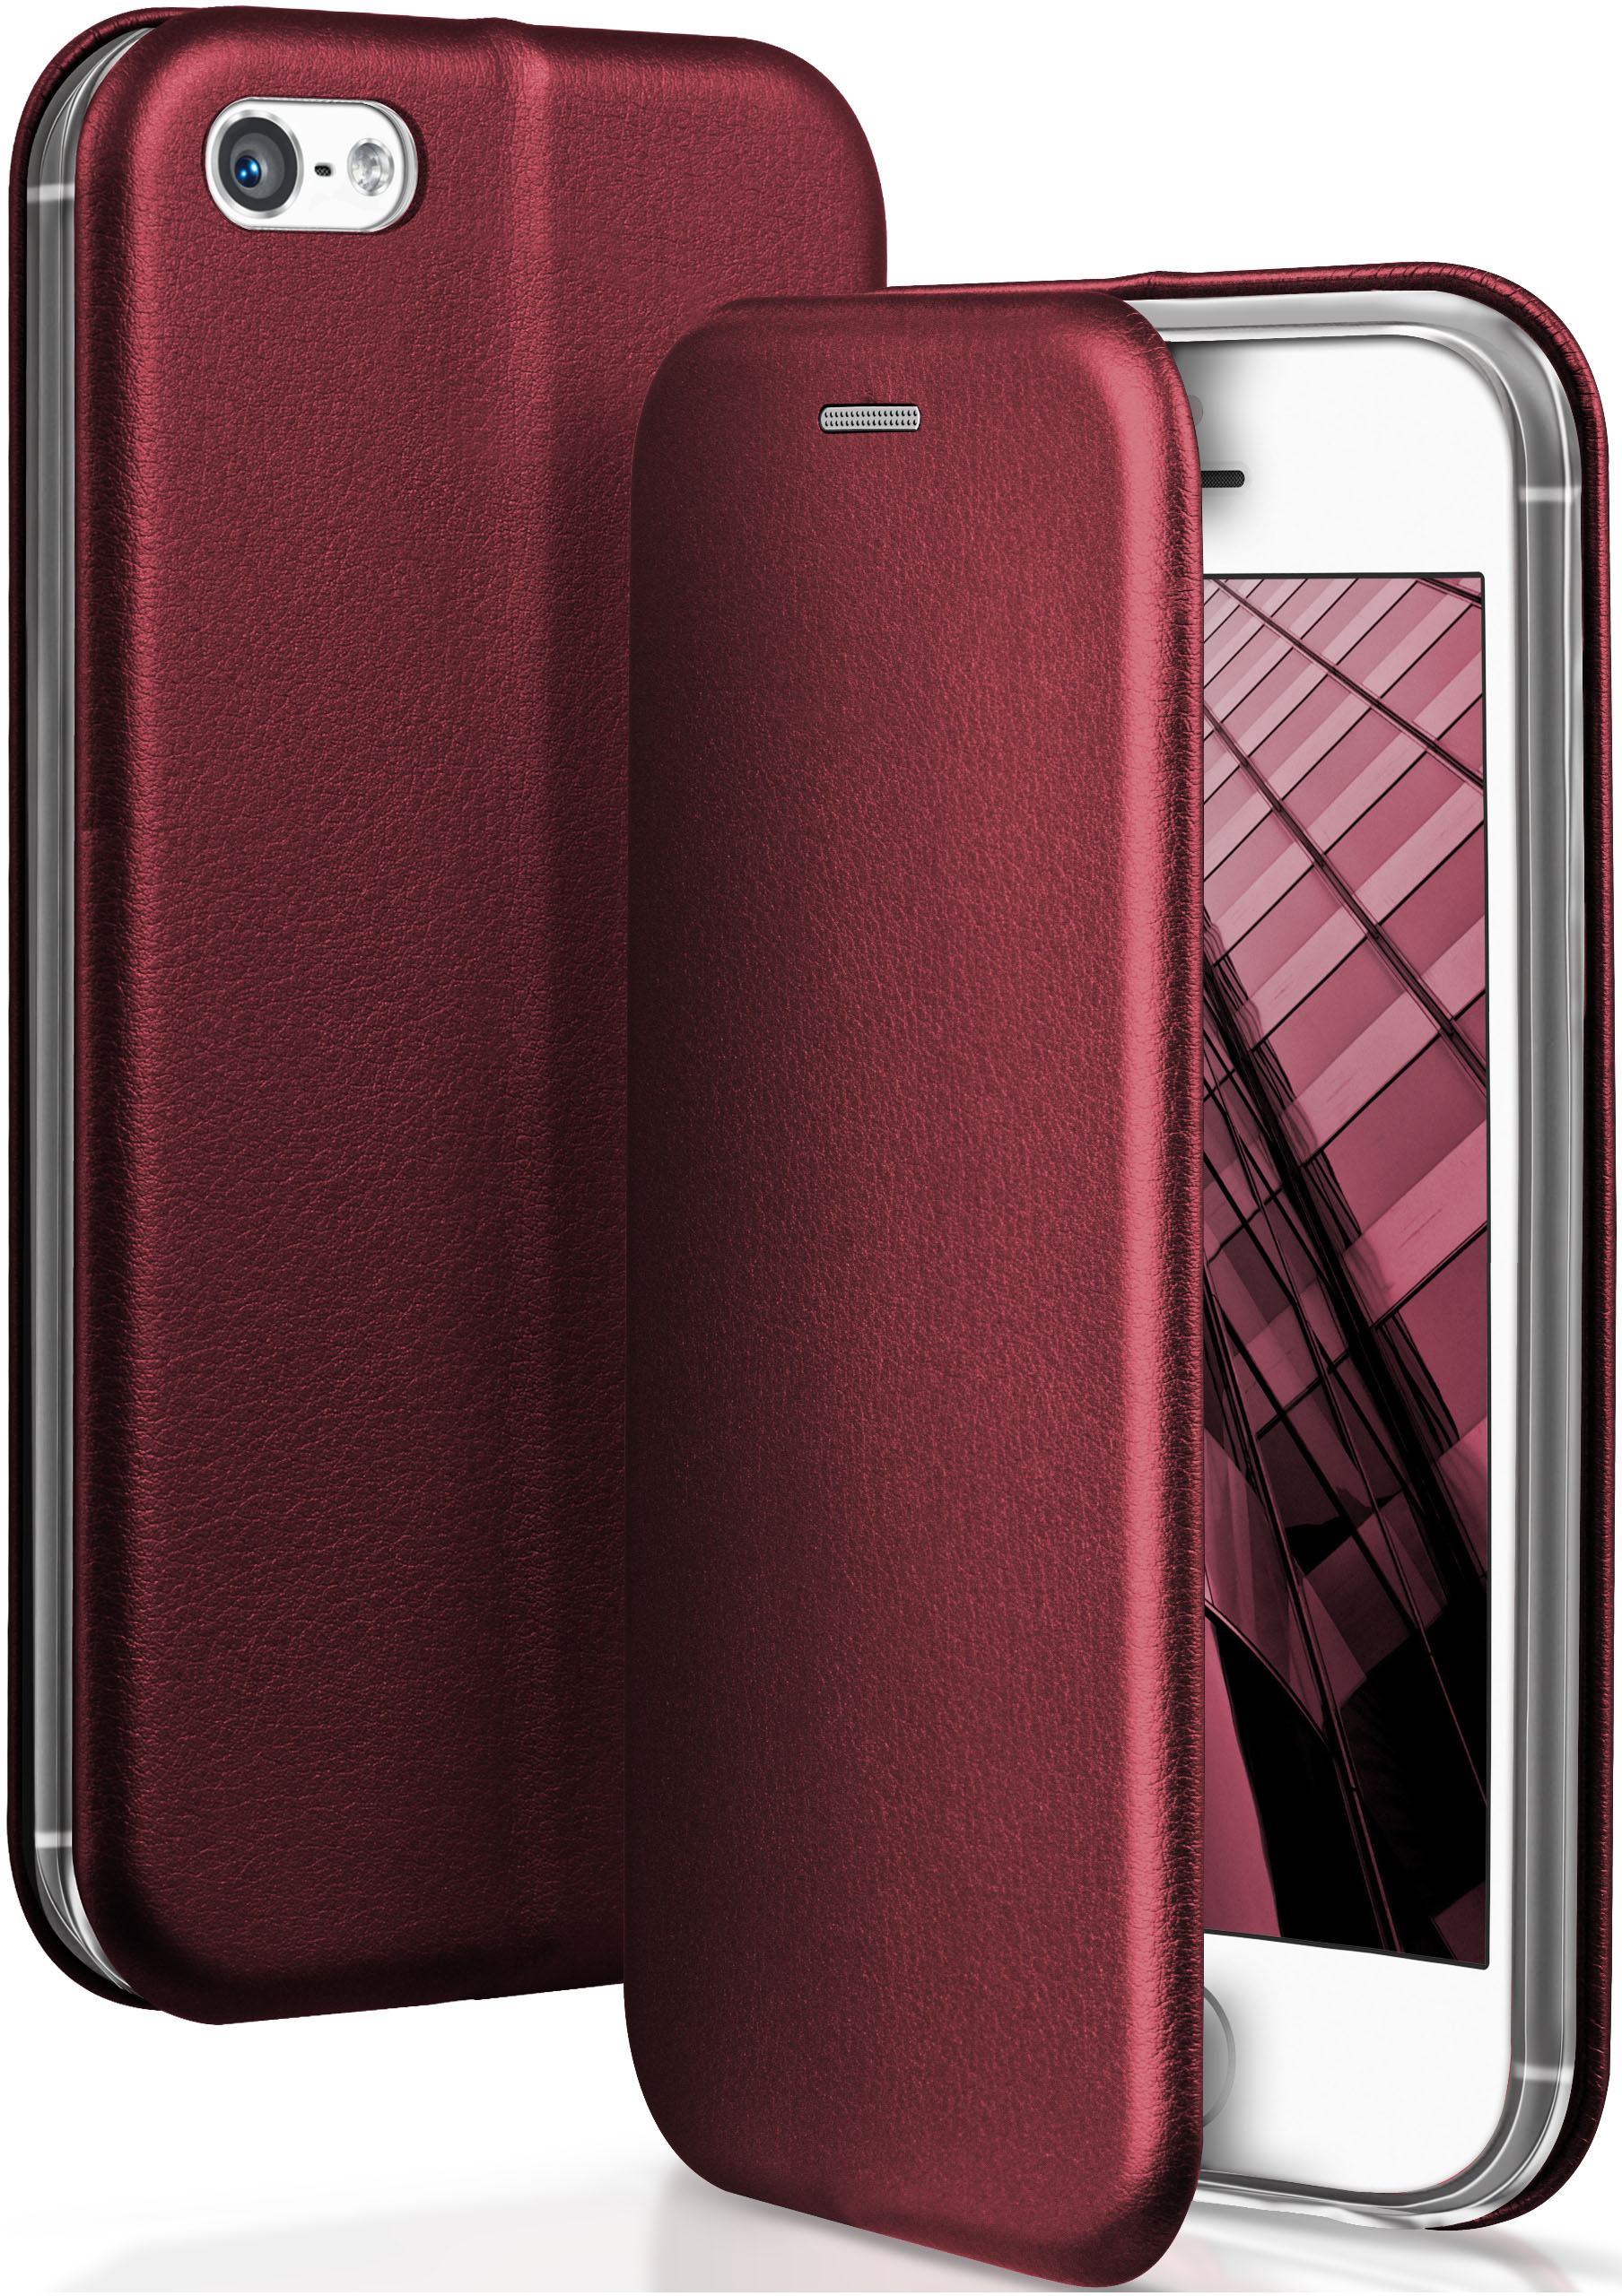 - / Cover, iPhone / ONEFLOW Burgund 5 5s Business Case, (2016), Flip Red SE Apple,